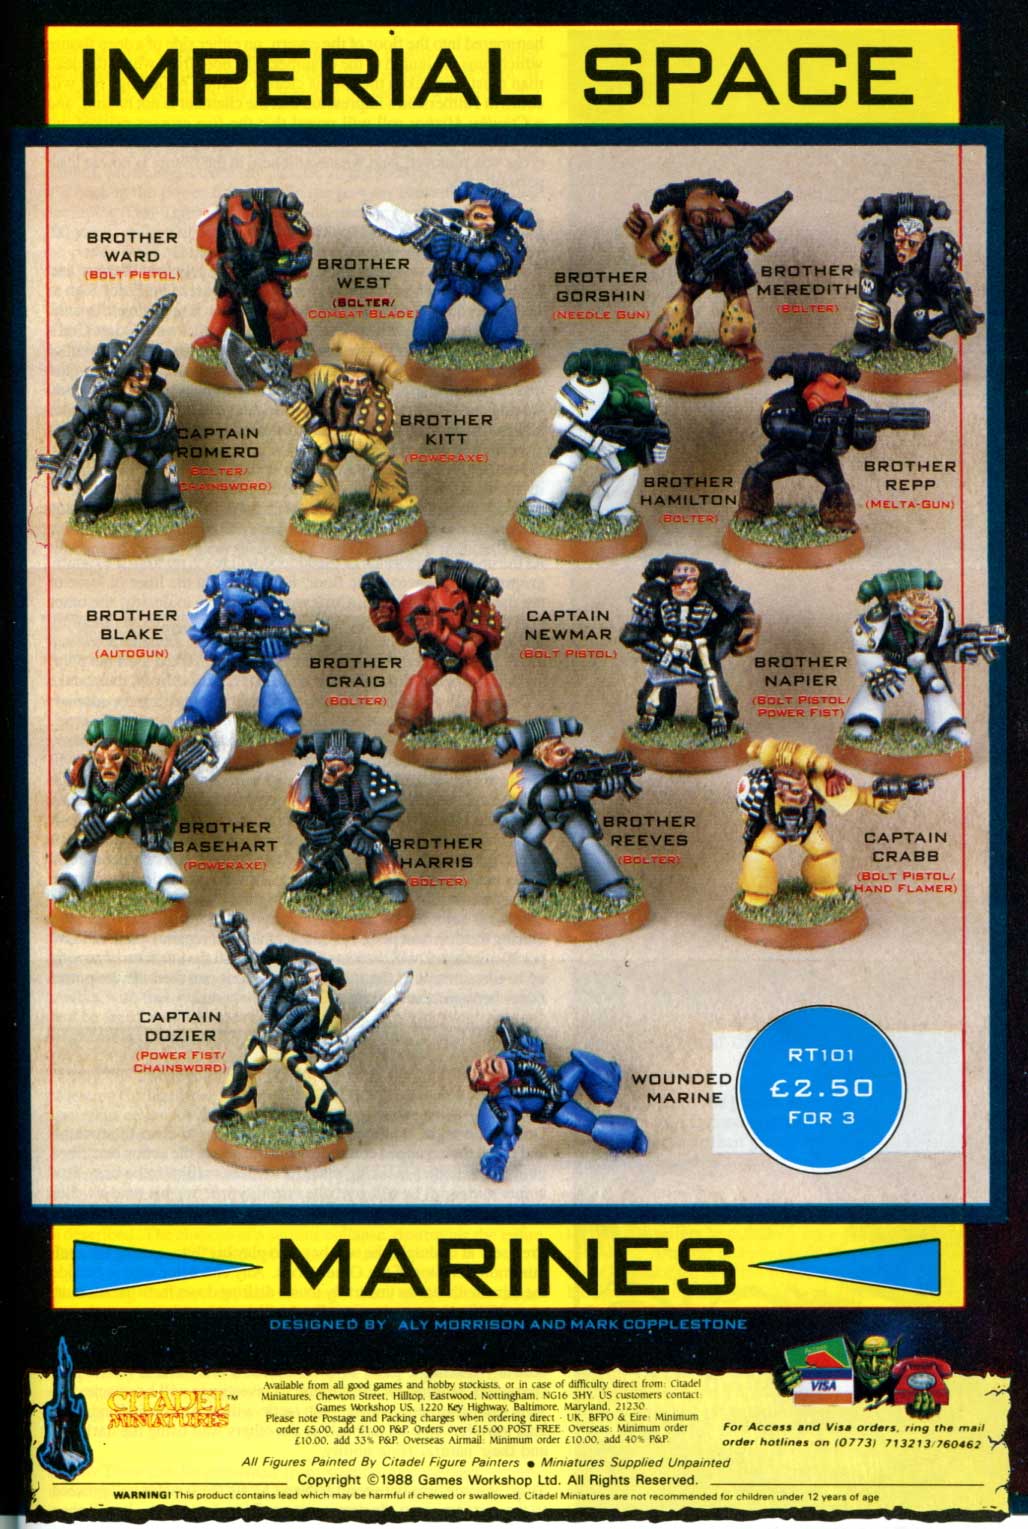 What do you guys think of the marine rogue color? i liked the all